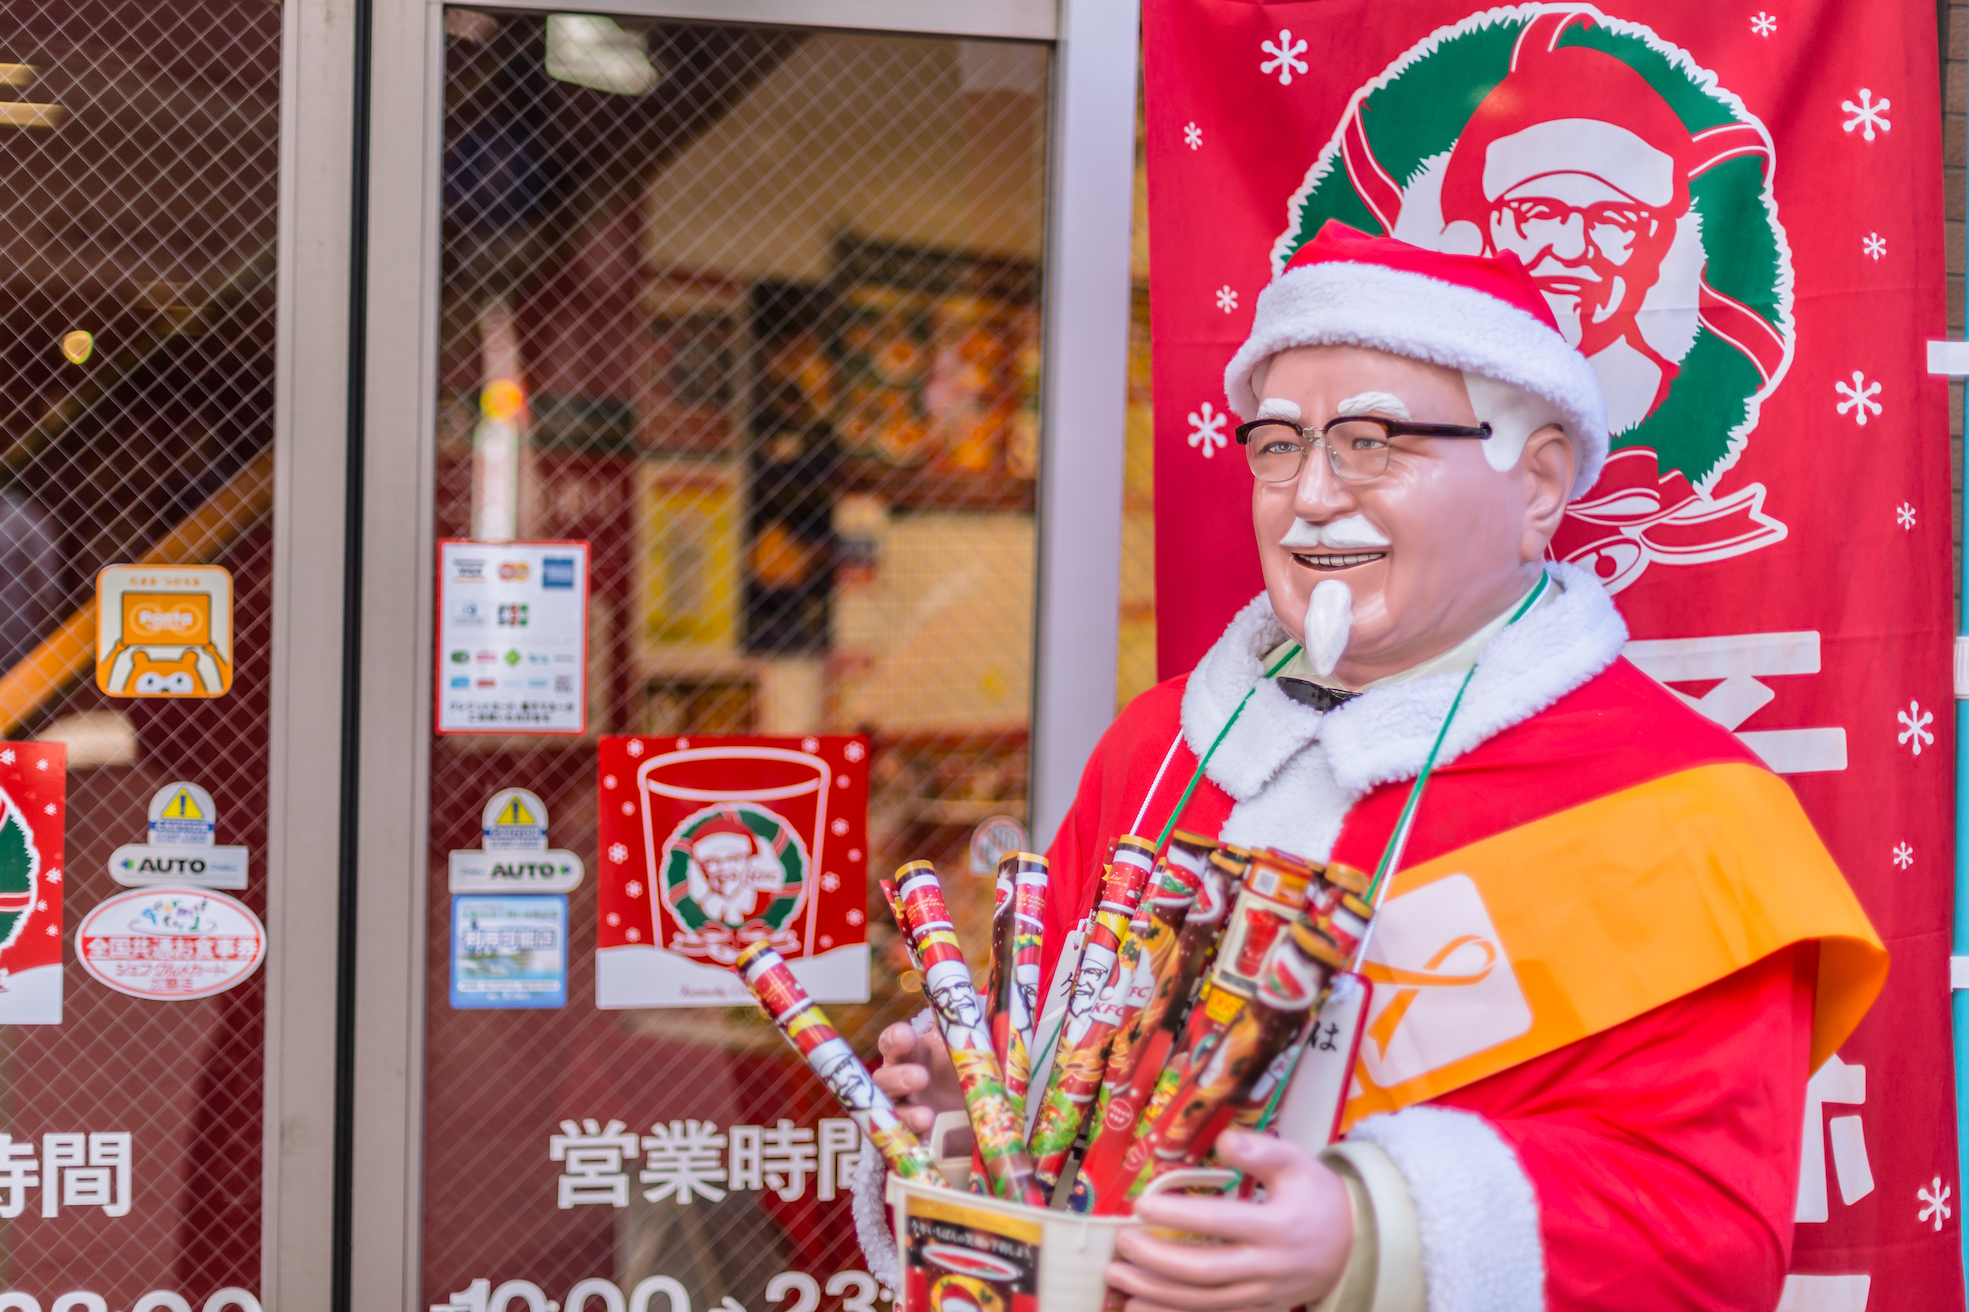 In Japan, eating KFC is how you celebrate the winter holidays